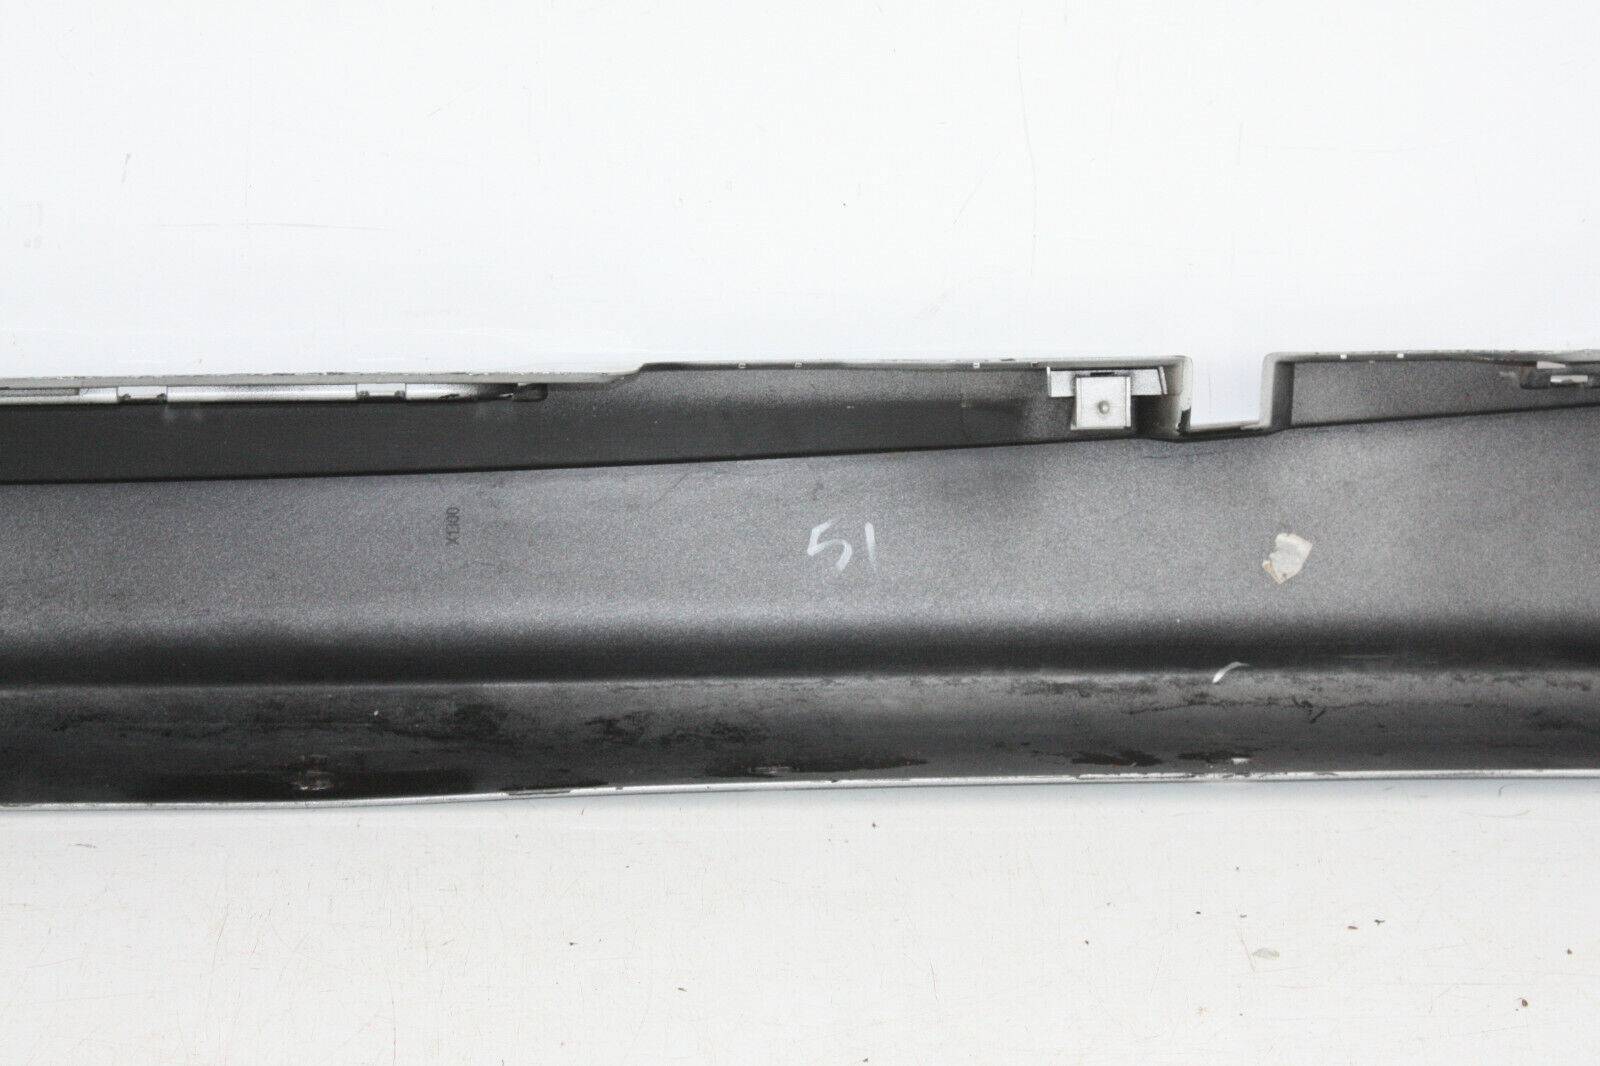 BMW-1-SERIES-E87-RIGHT-SIDE-SKIRT-2004-TO-2007-175367544522-7